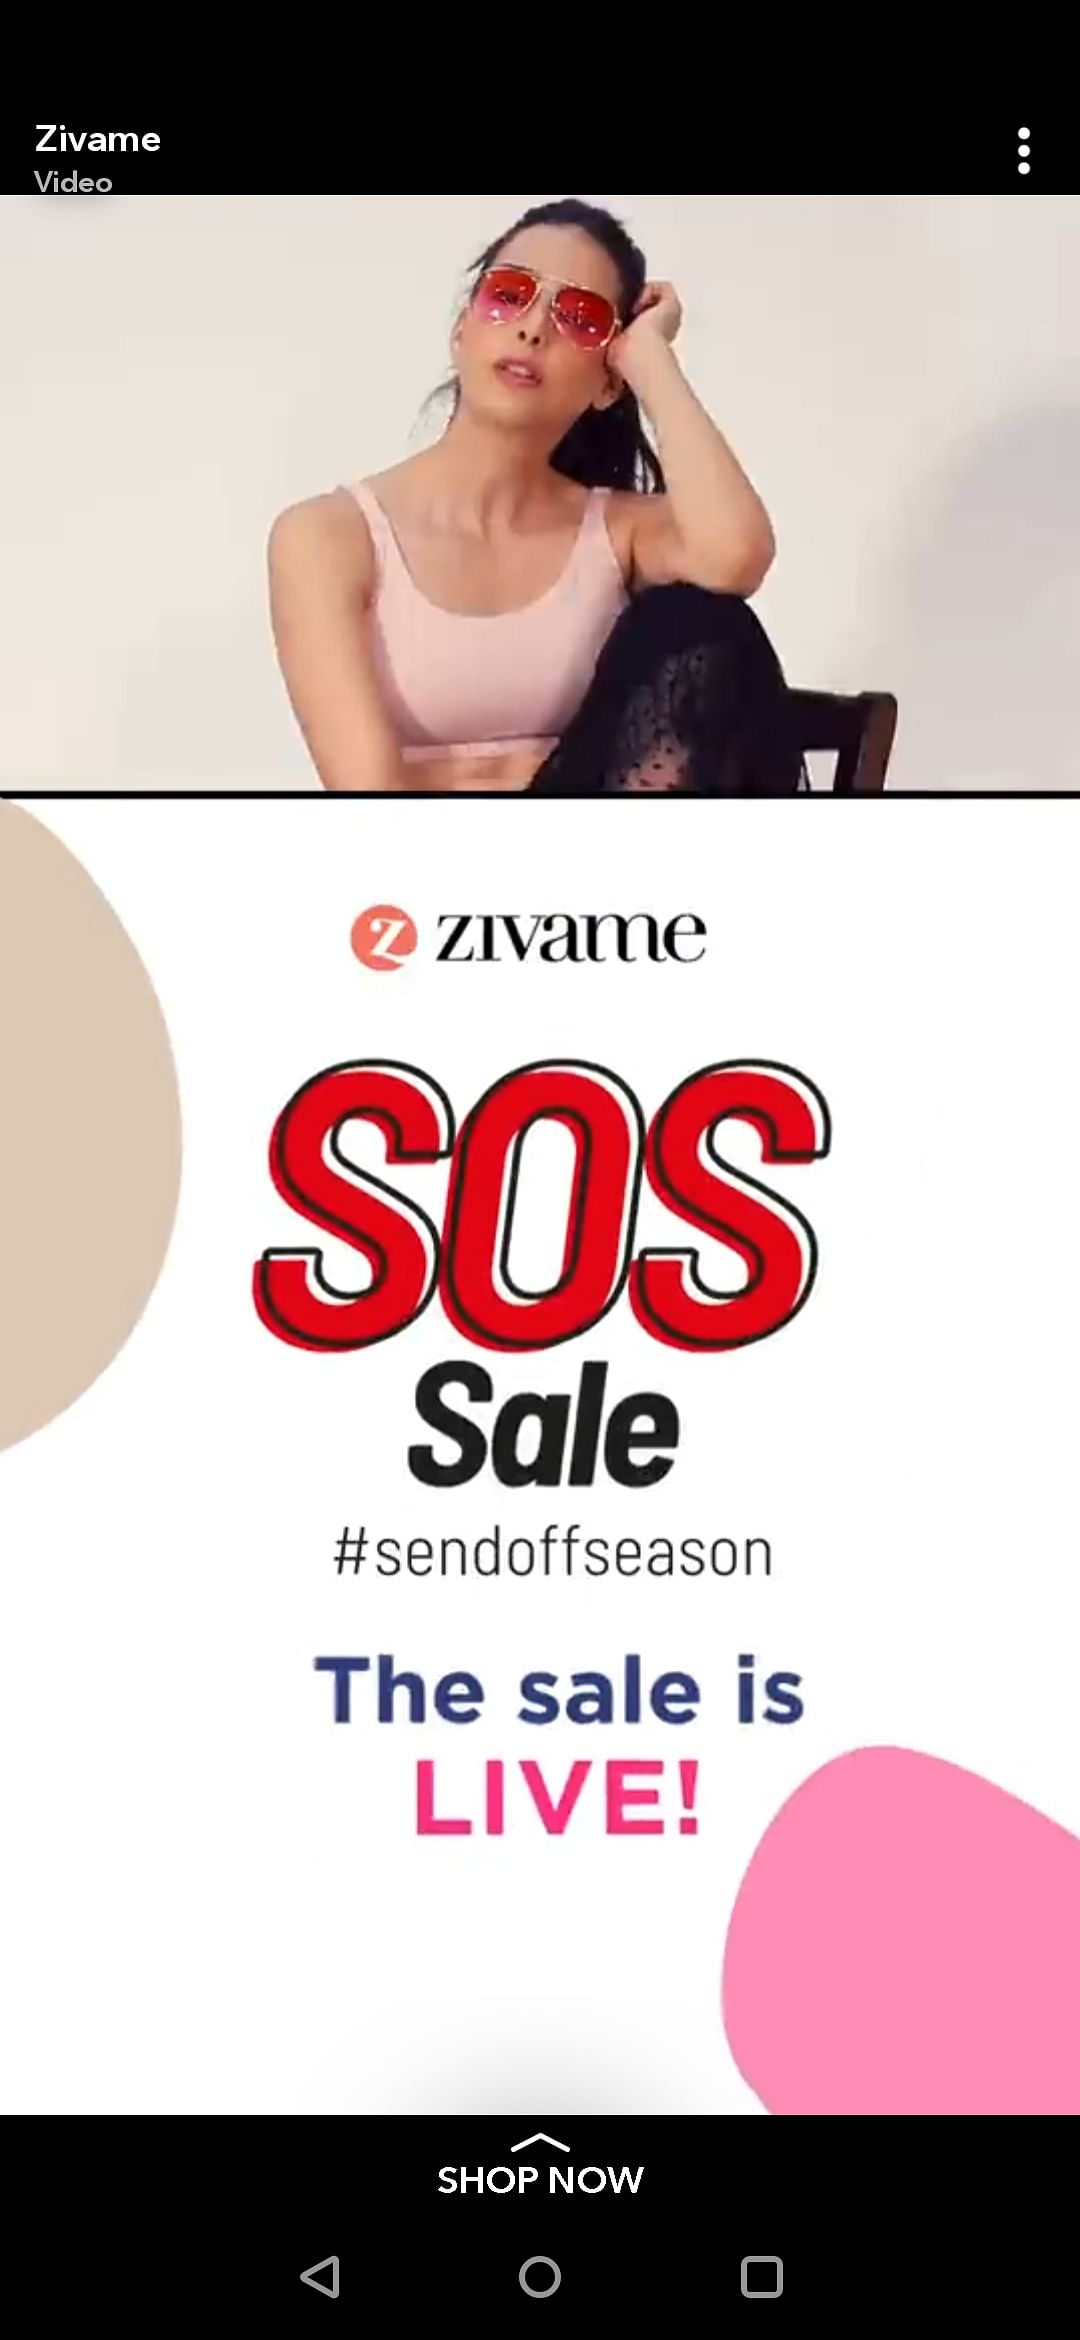 An ad for a Zivame sale